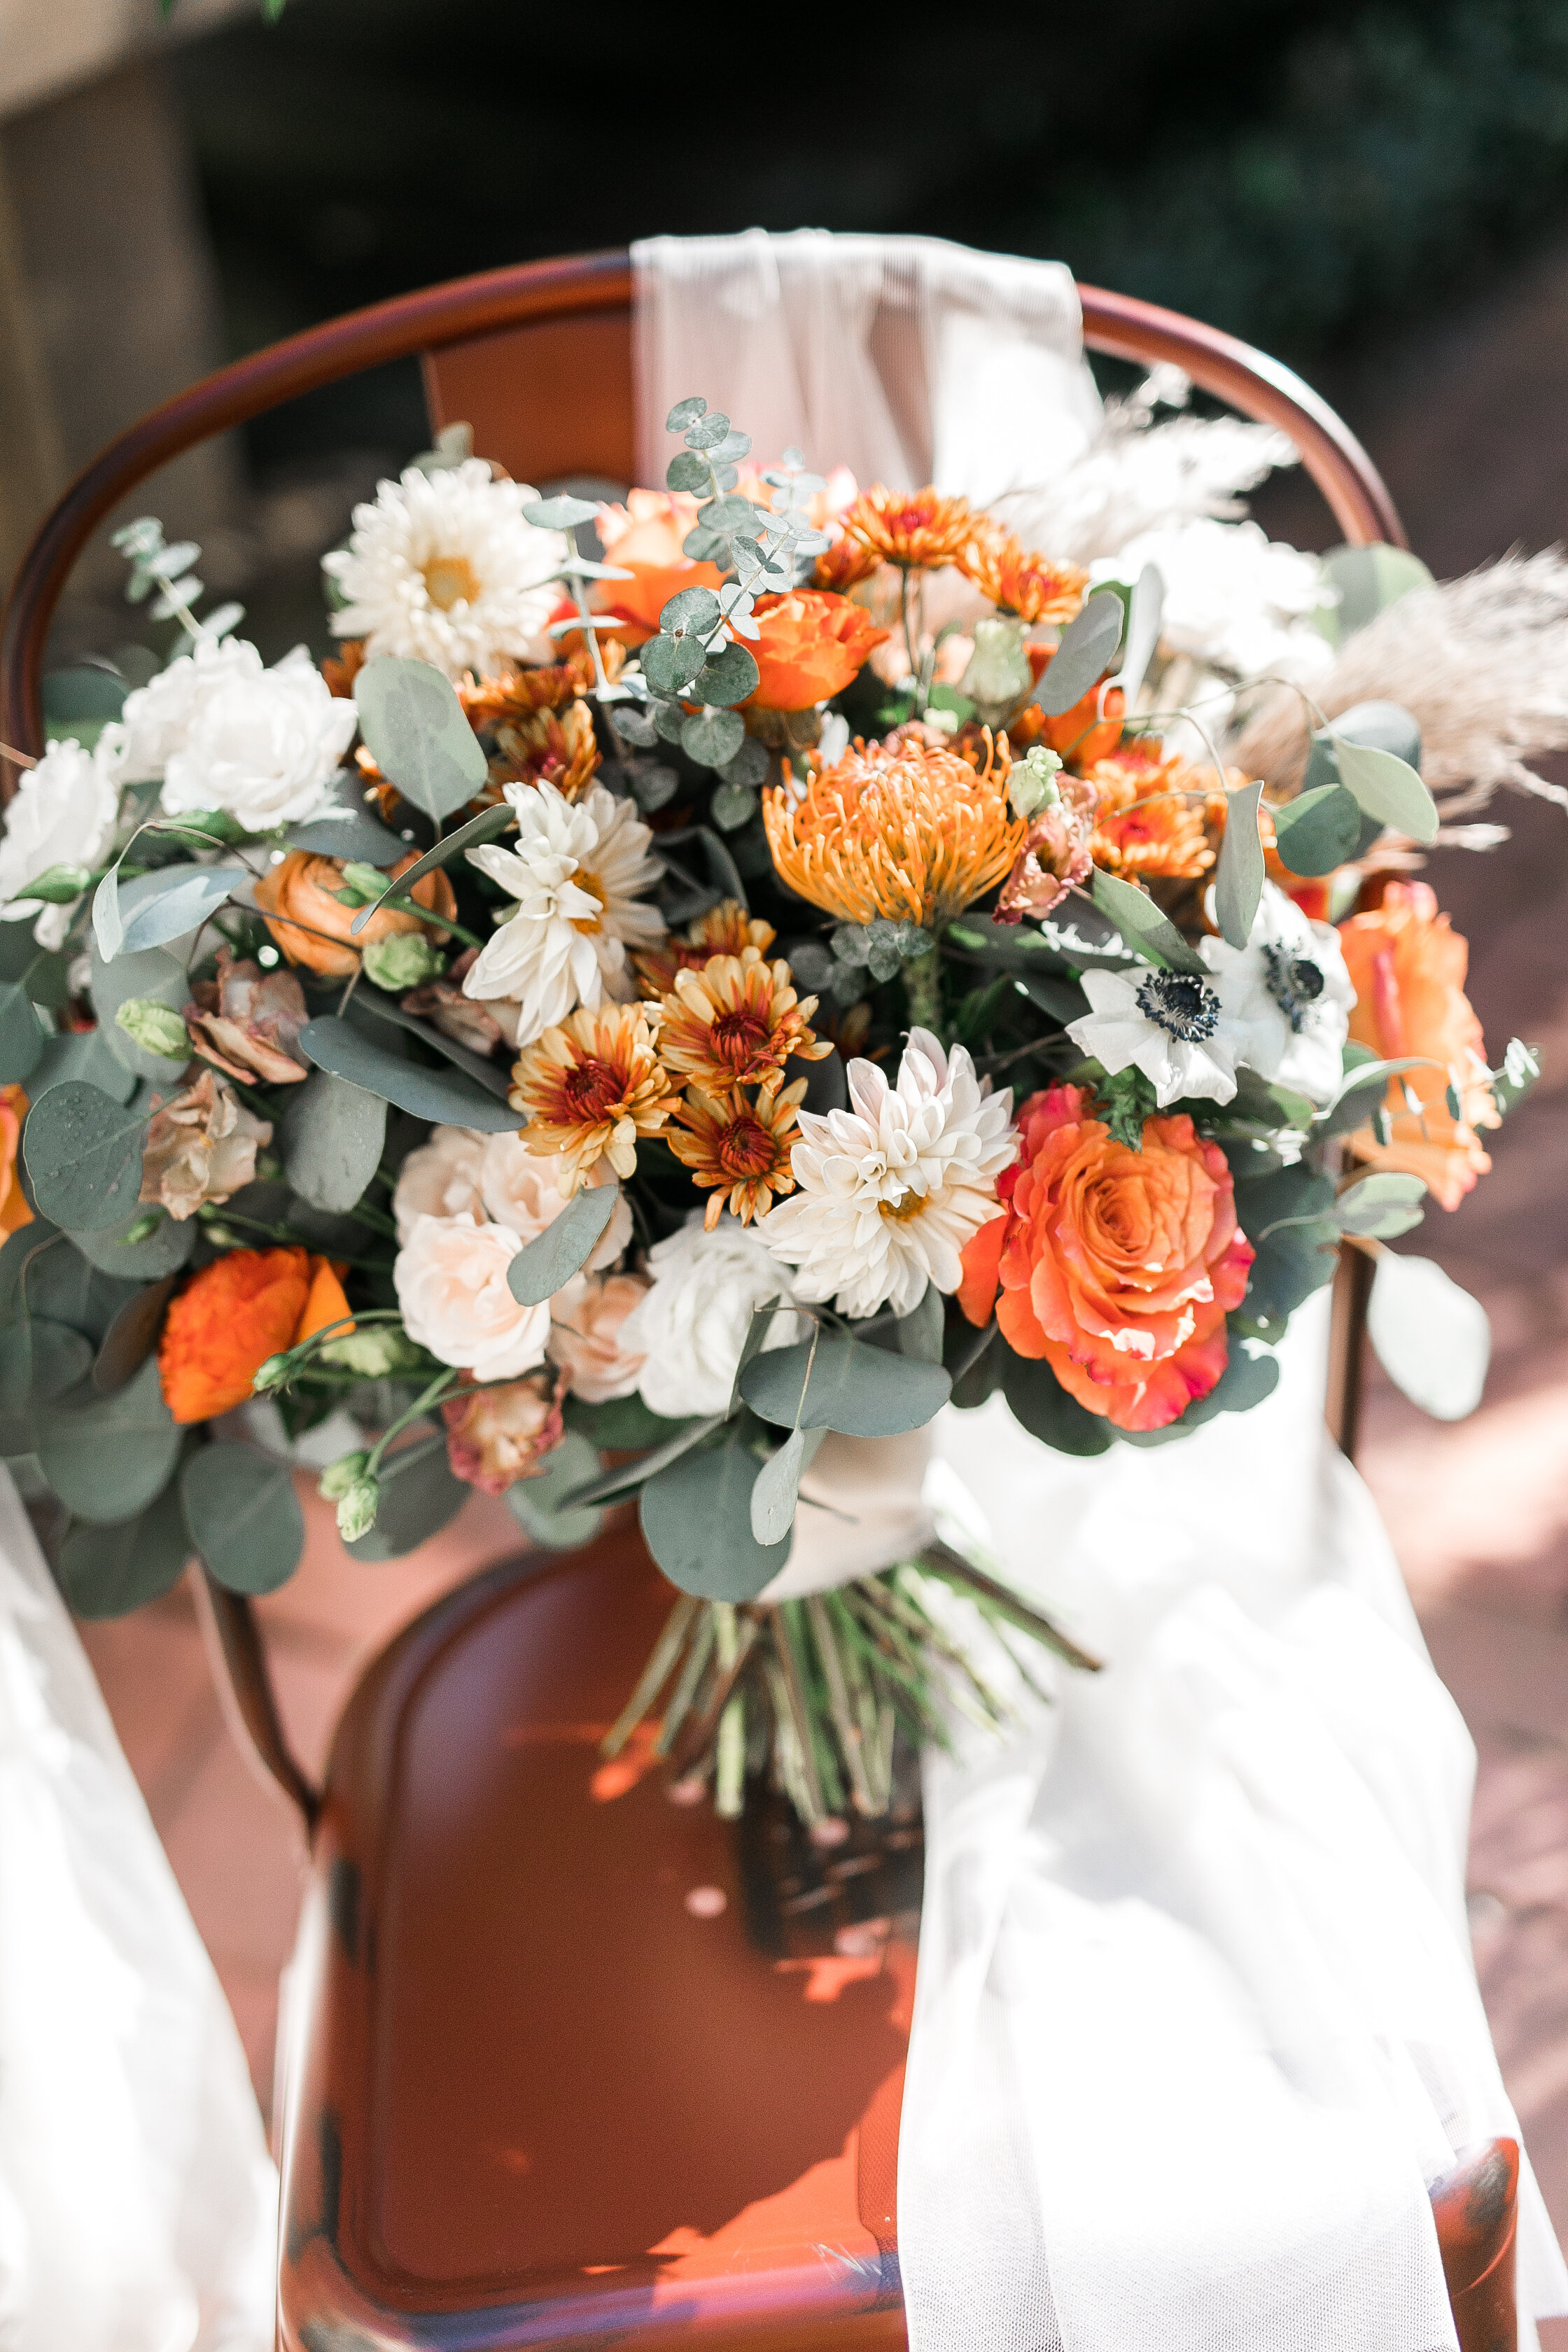 ivory-and-beau-florals-alex-and-oley-wedding-flowers-wedding-florals-savannah-wedding-southern-wedding-florist-savannah-florist-georgia-florist-wedding-inspiration-ThePerryWedding-81.jpg